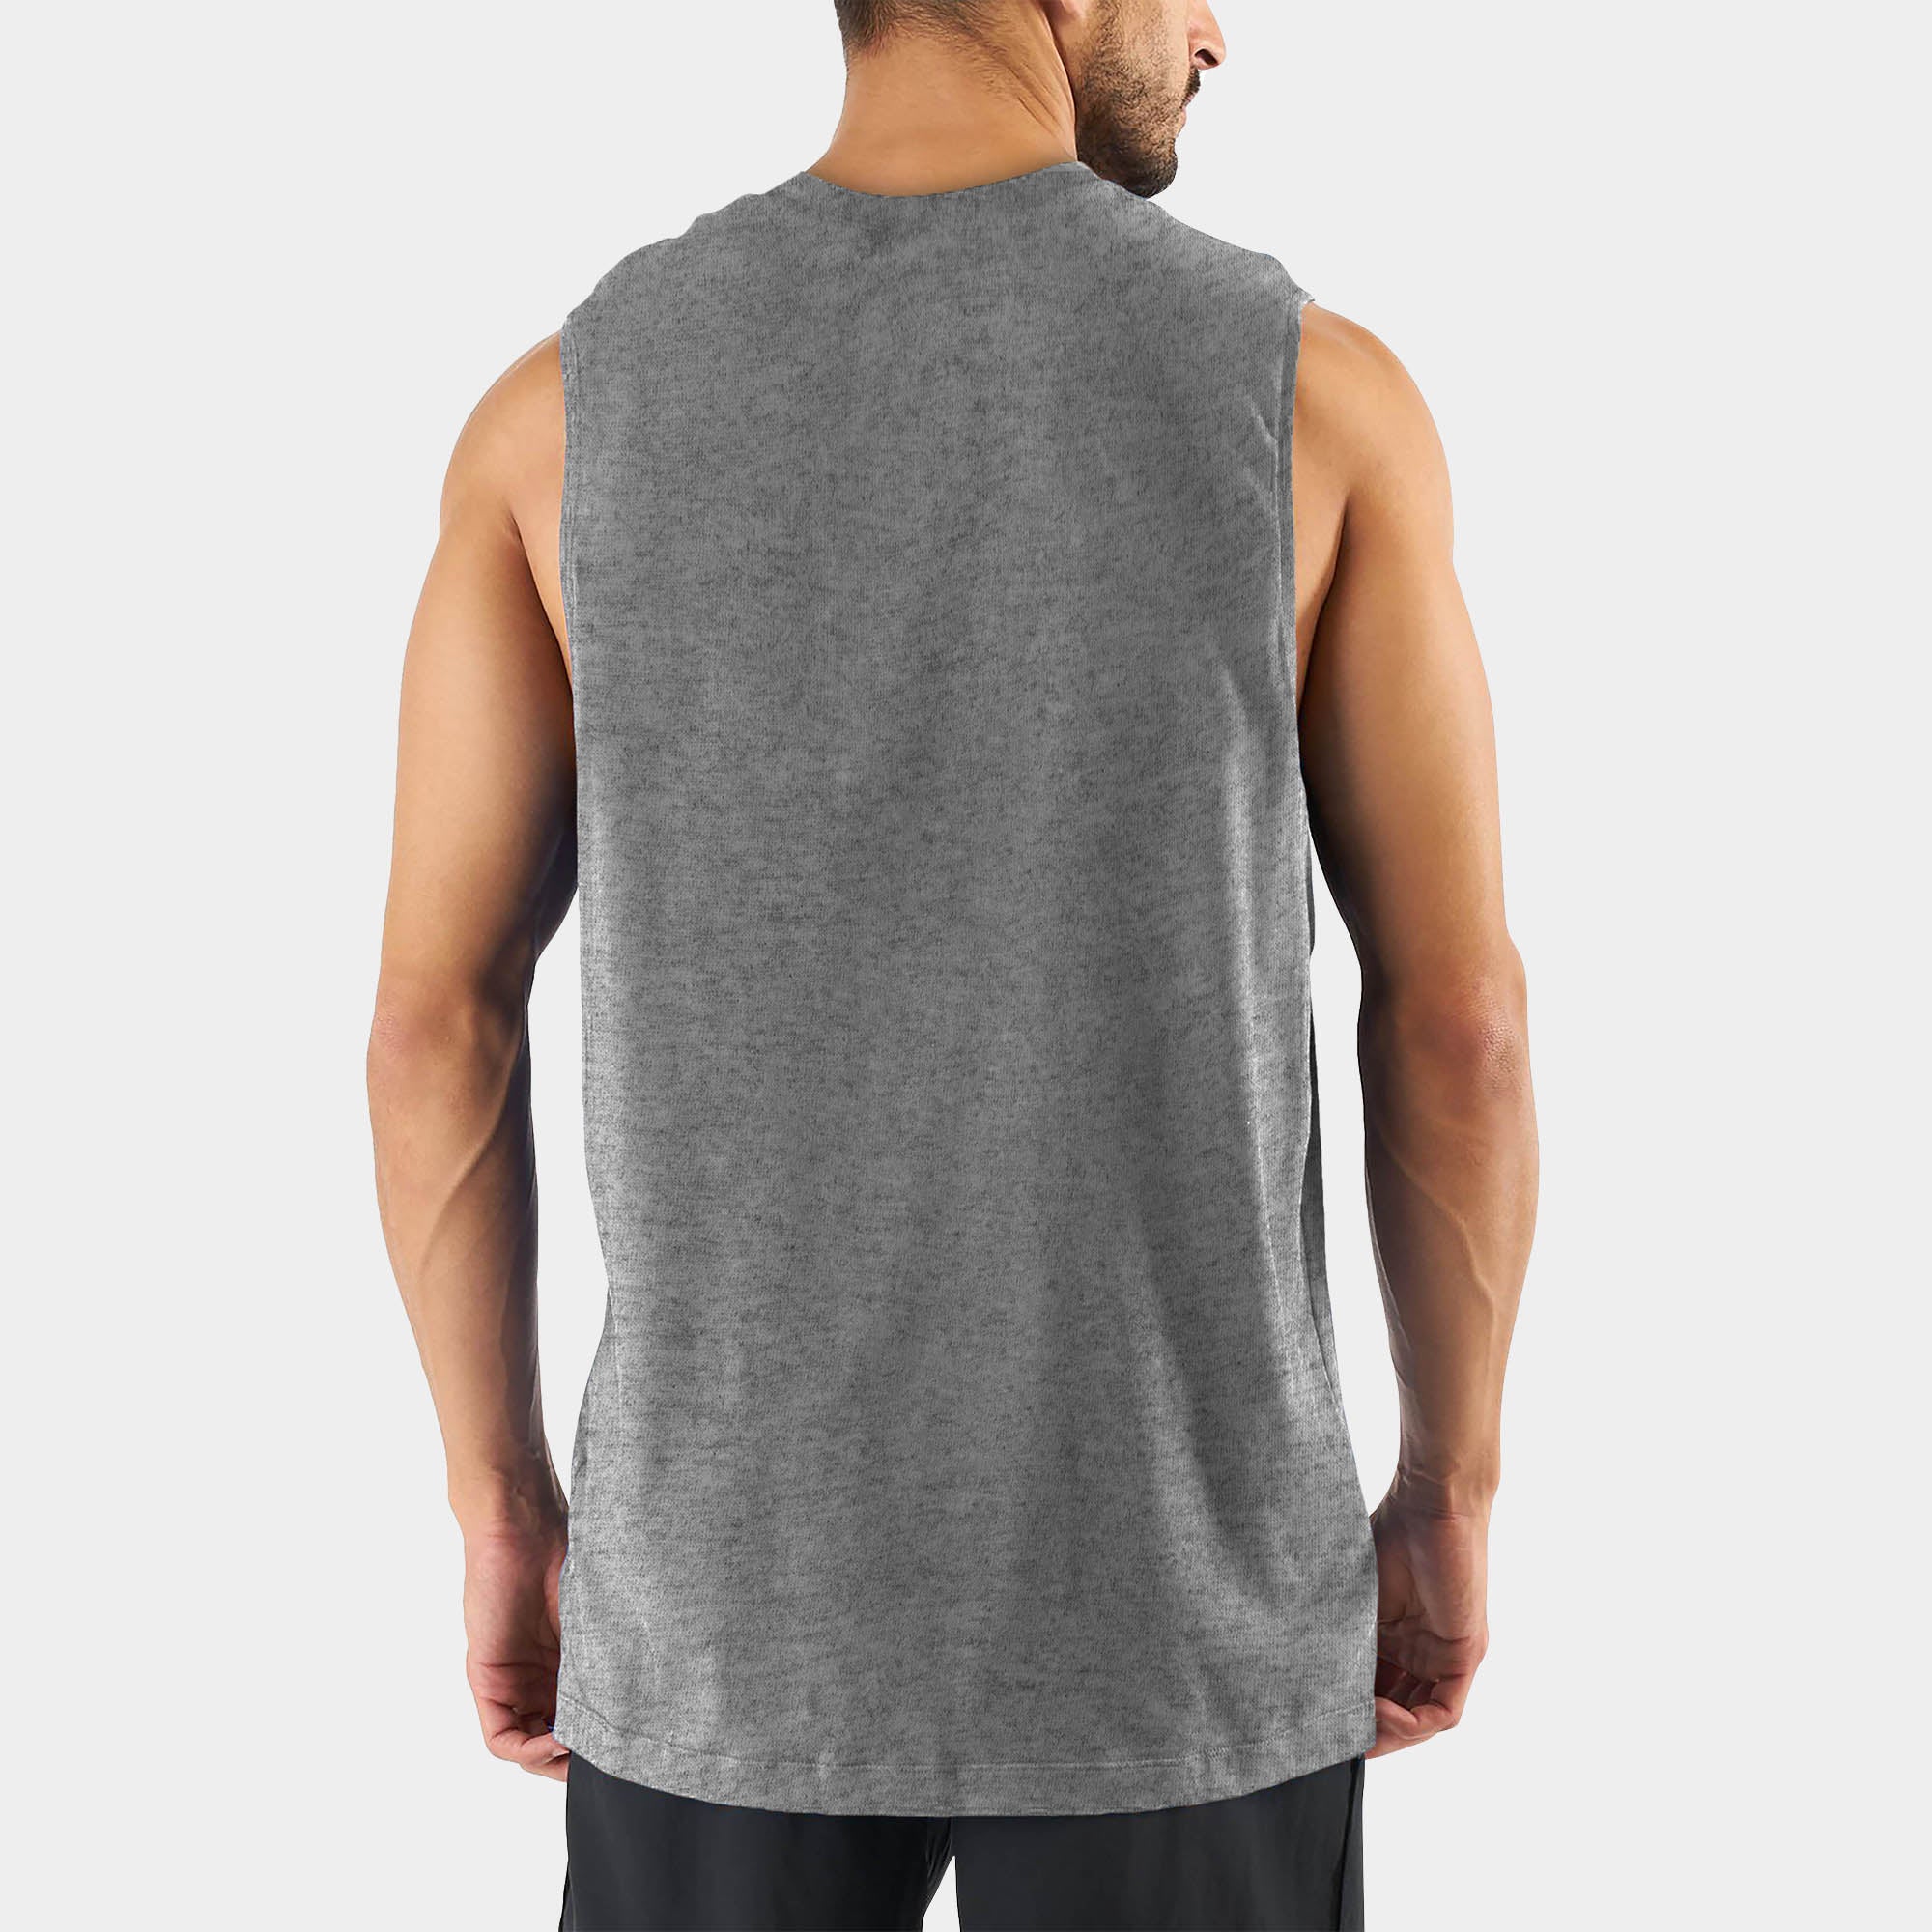 muscle tank_muscle tee_muscle tank tops_cropped muscle tank_under armour muscle shirt_insta slim tank_men muscle shirt_tank top_Heather Gray